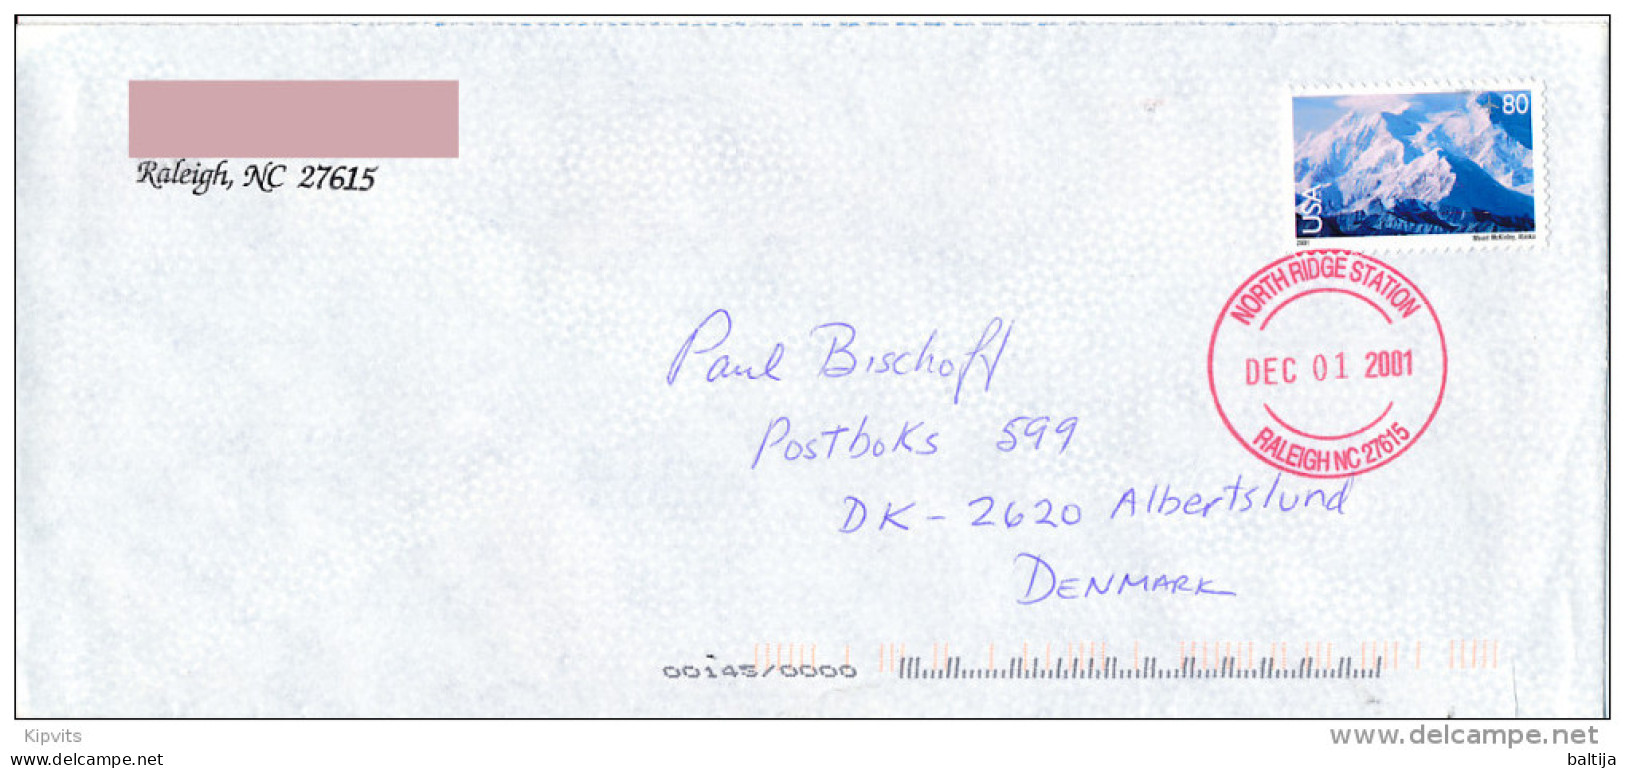 80c Mount McKinley Solo Cover Abroad - December 1, 2001 North Ridge Station Raleigh NC 27615 - Cartas & Documentos